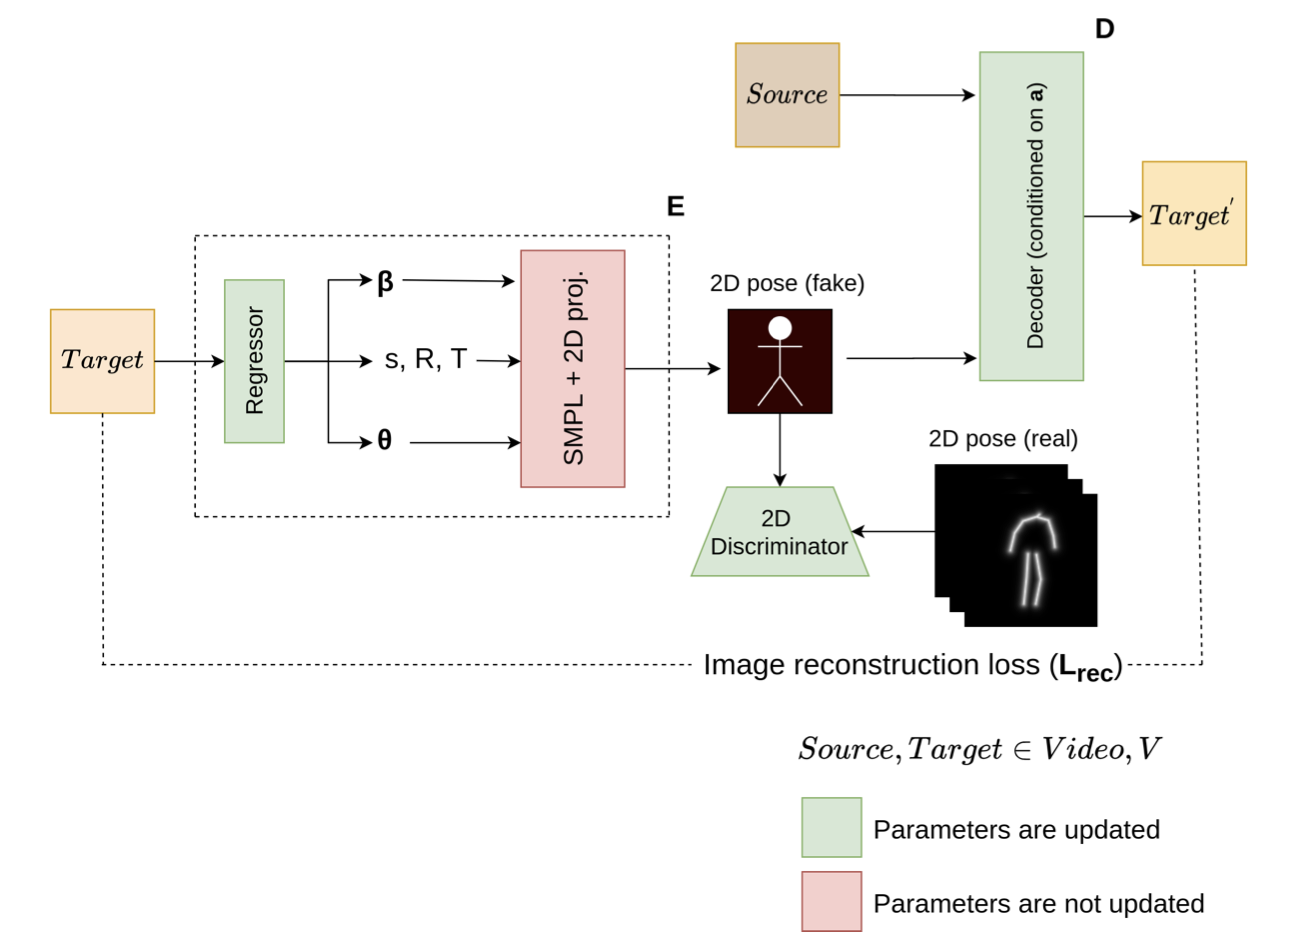 Multi-view self-supervised 3D reconstruction